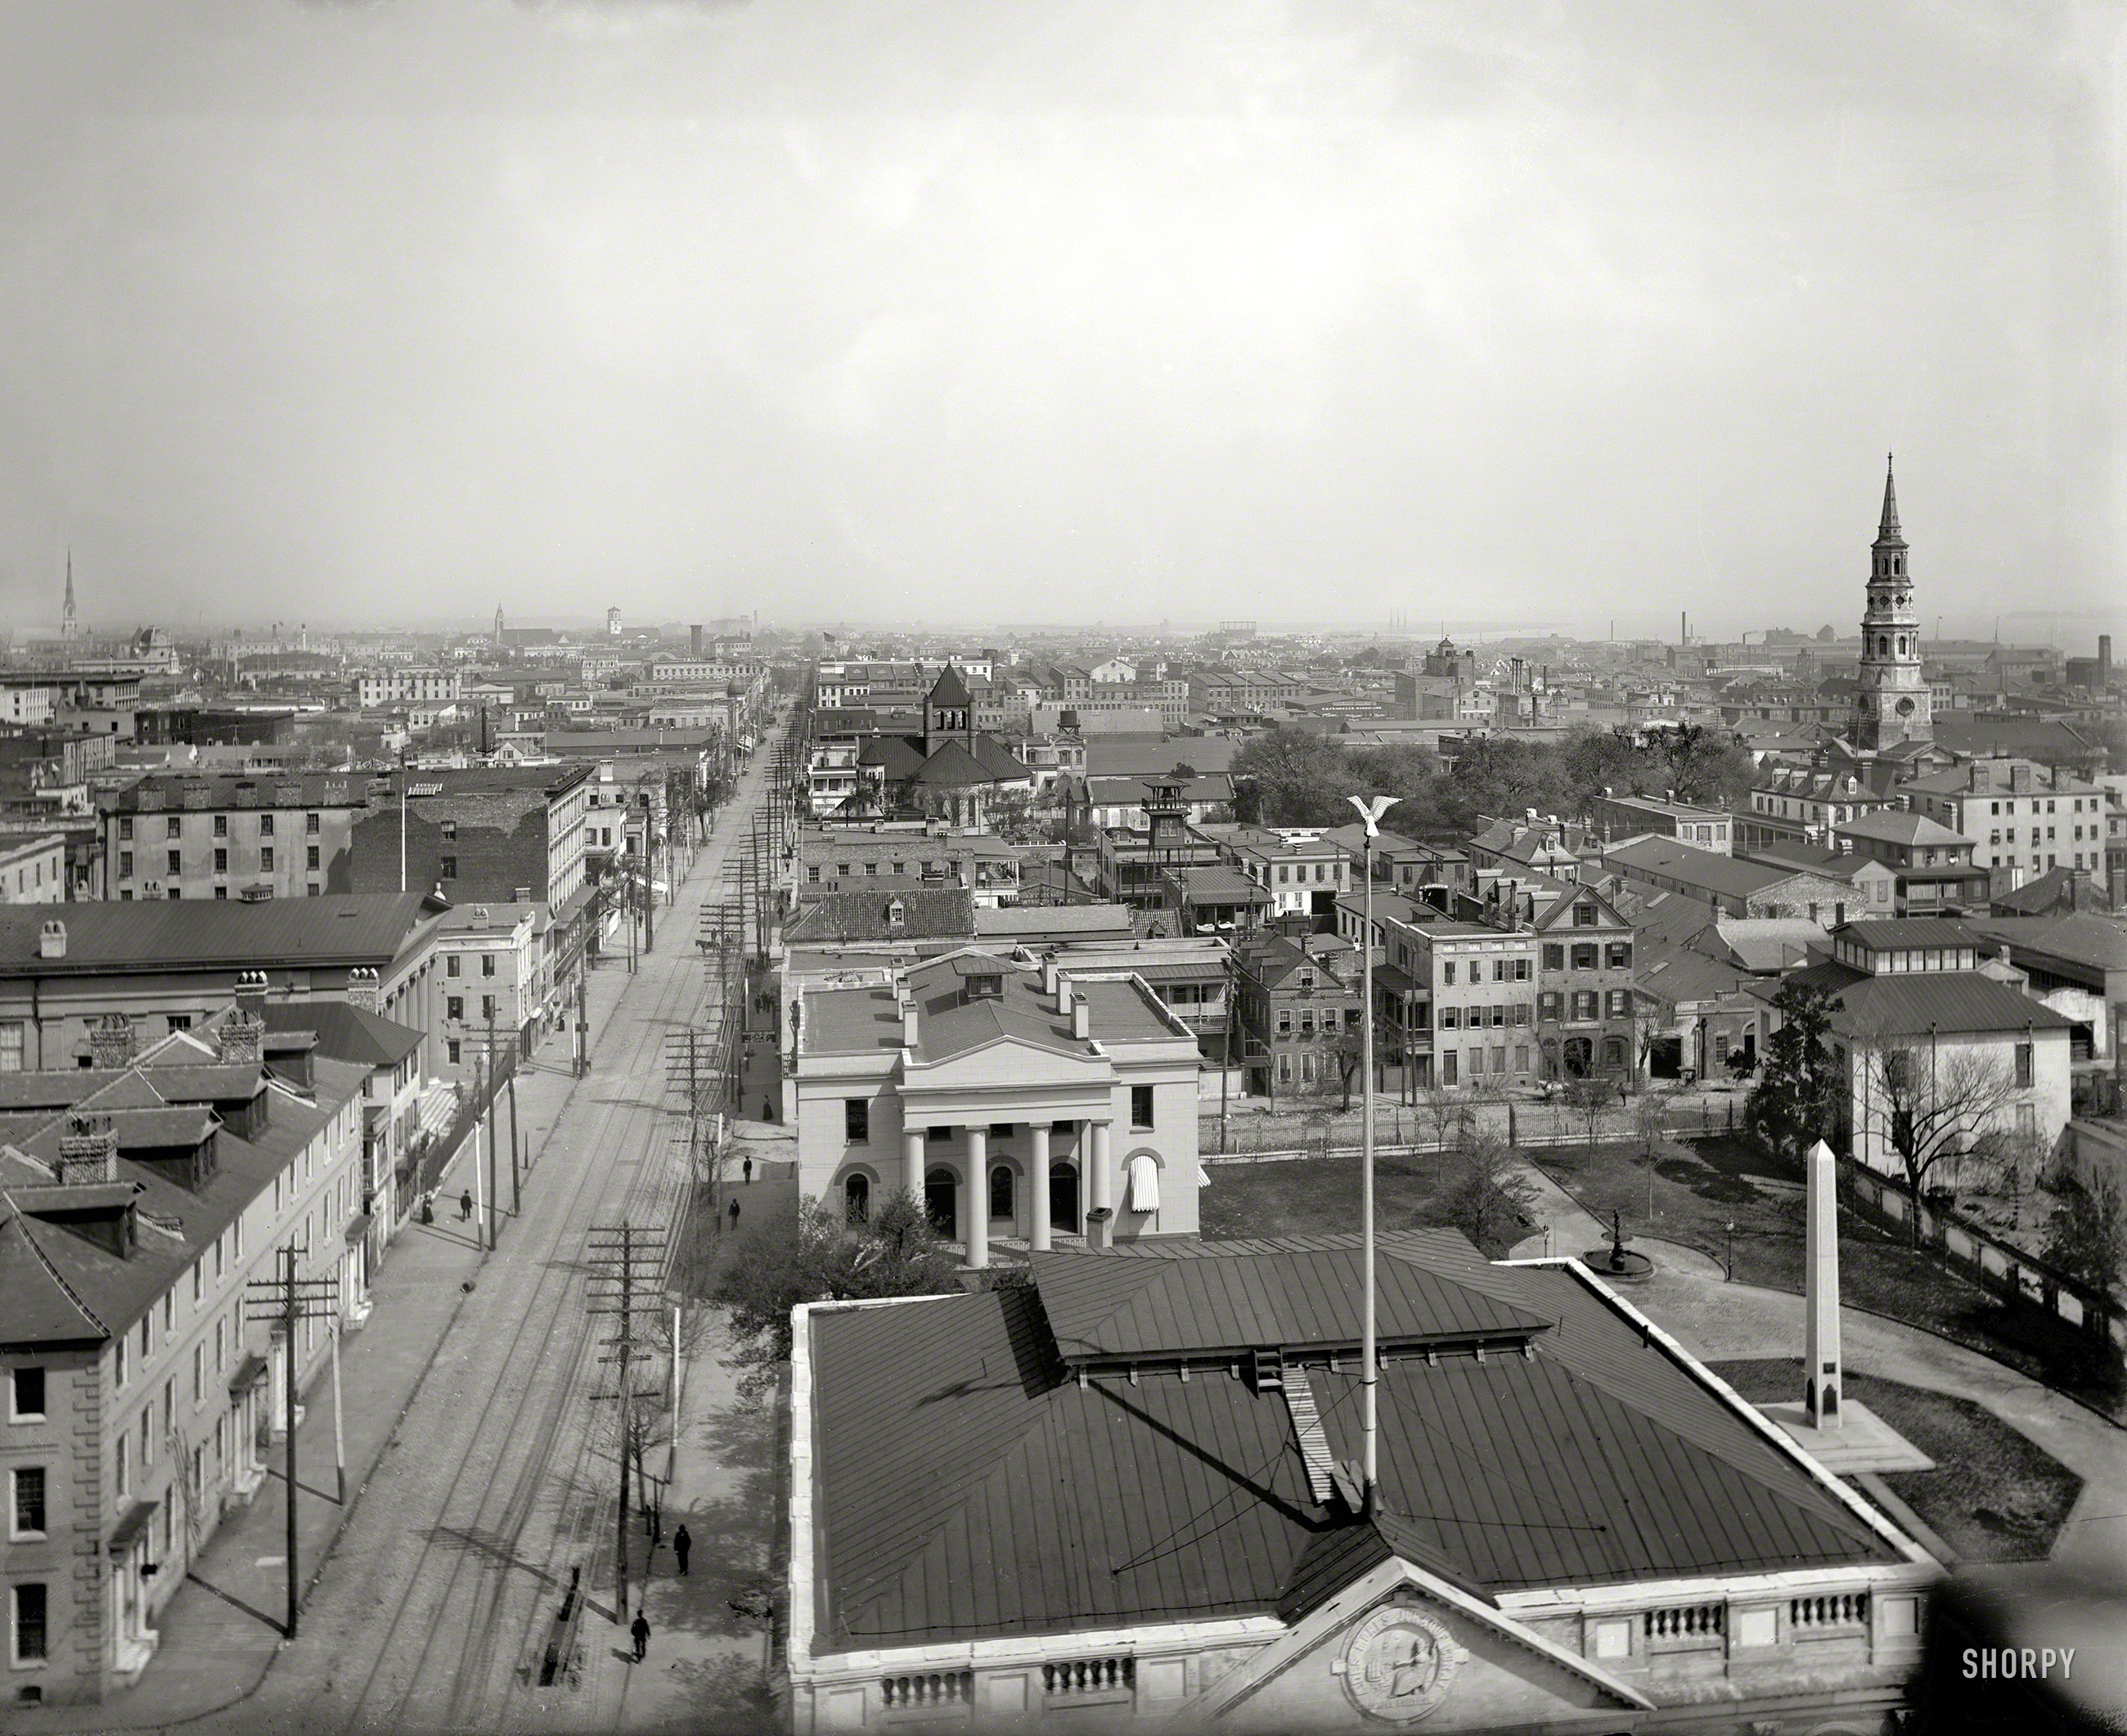 Circa 1900. "Charleston, S.C., from St. Michael's Church." St. Philip's Church at right. 8x10 inch glass negative, Detroit Publishing Company. View full size.